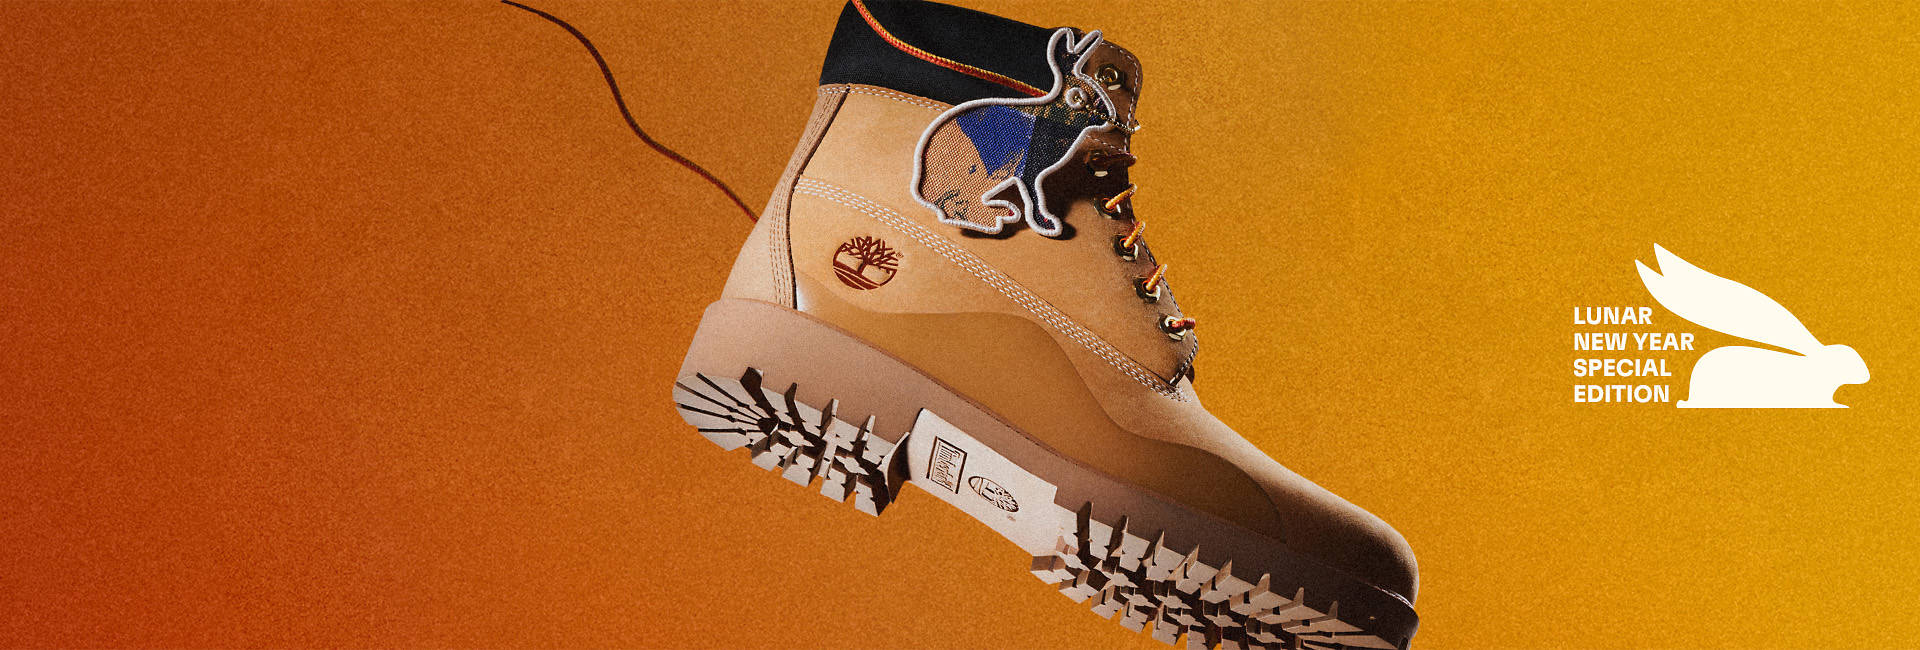 Image of a wheat colored Men's Timberland® Heritage 6-Inch Waterproof boot with rabbit outline hangtag and black collar, flying through the air on a downward trajectory against an orange gradient background.